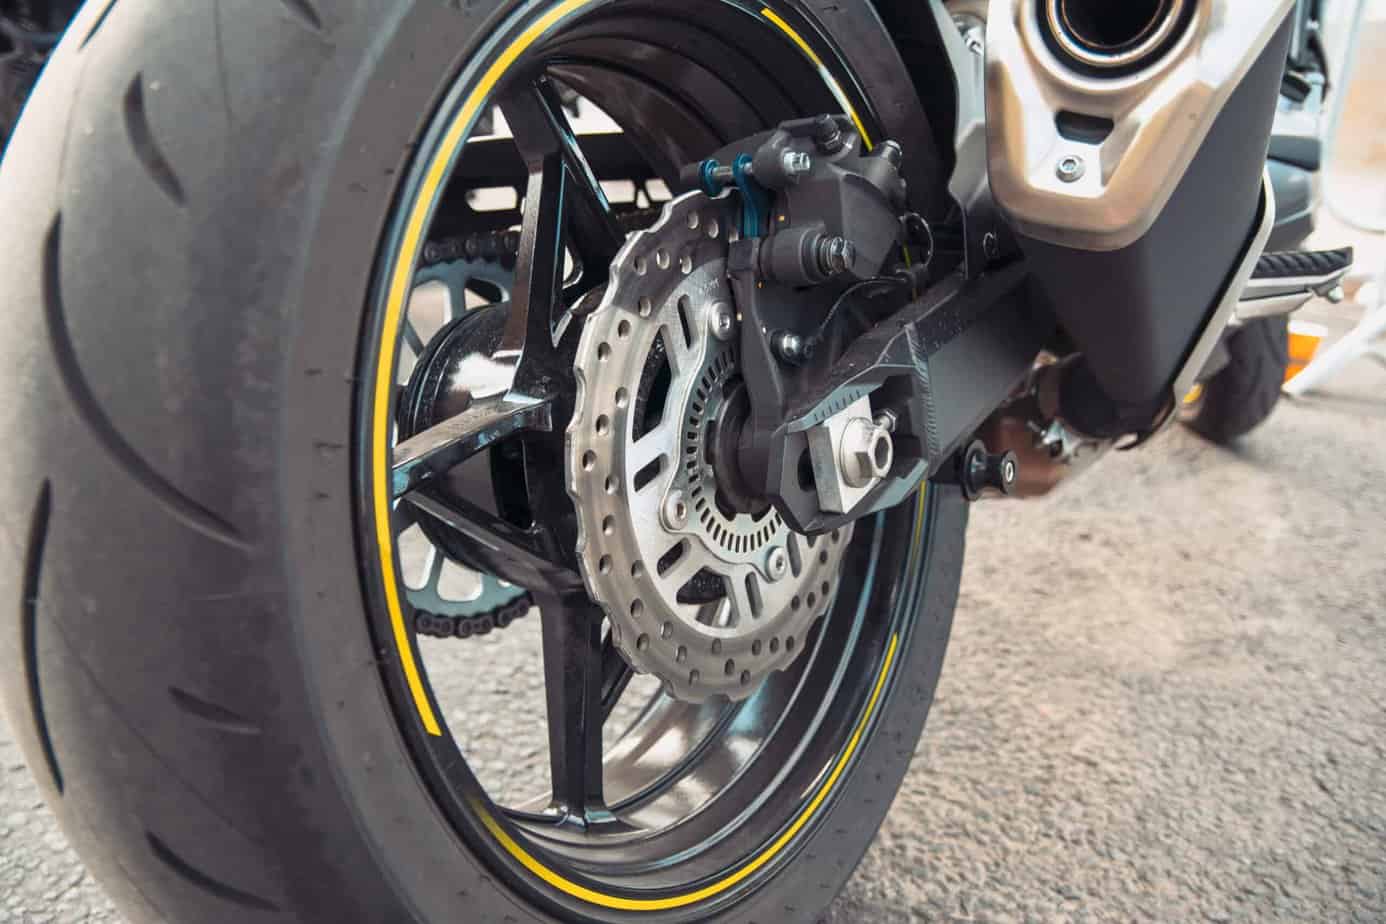 Stay Safe and Ride with Confidence: A Look at the Top Tire for Motorcycle